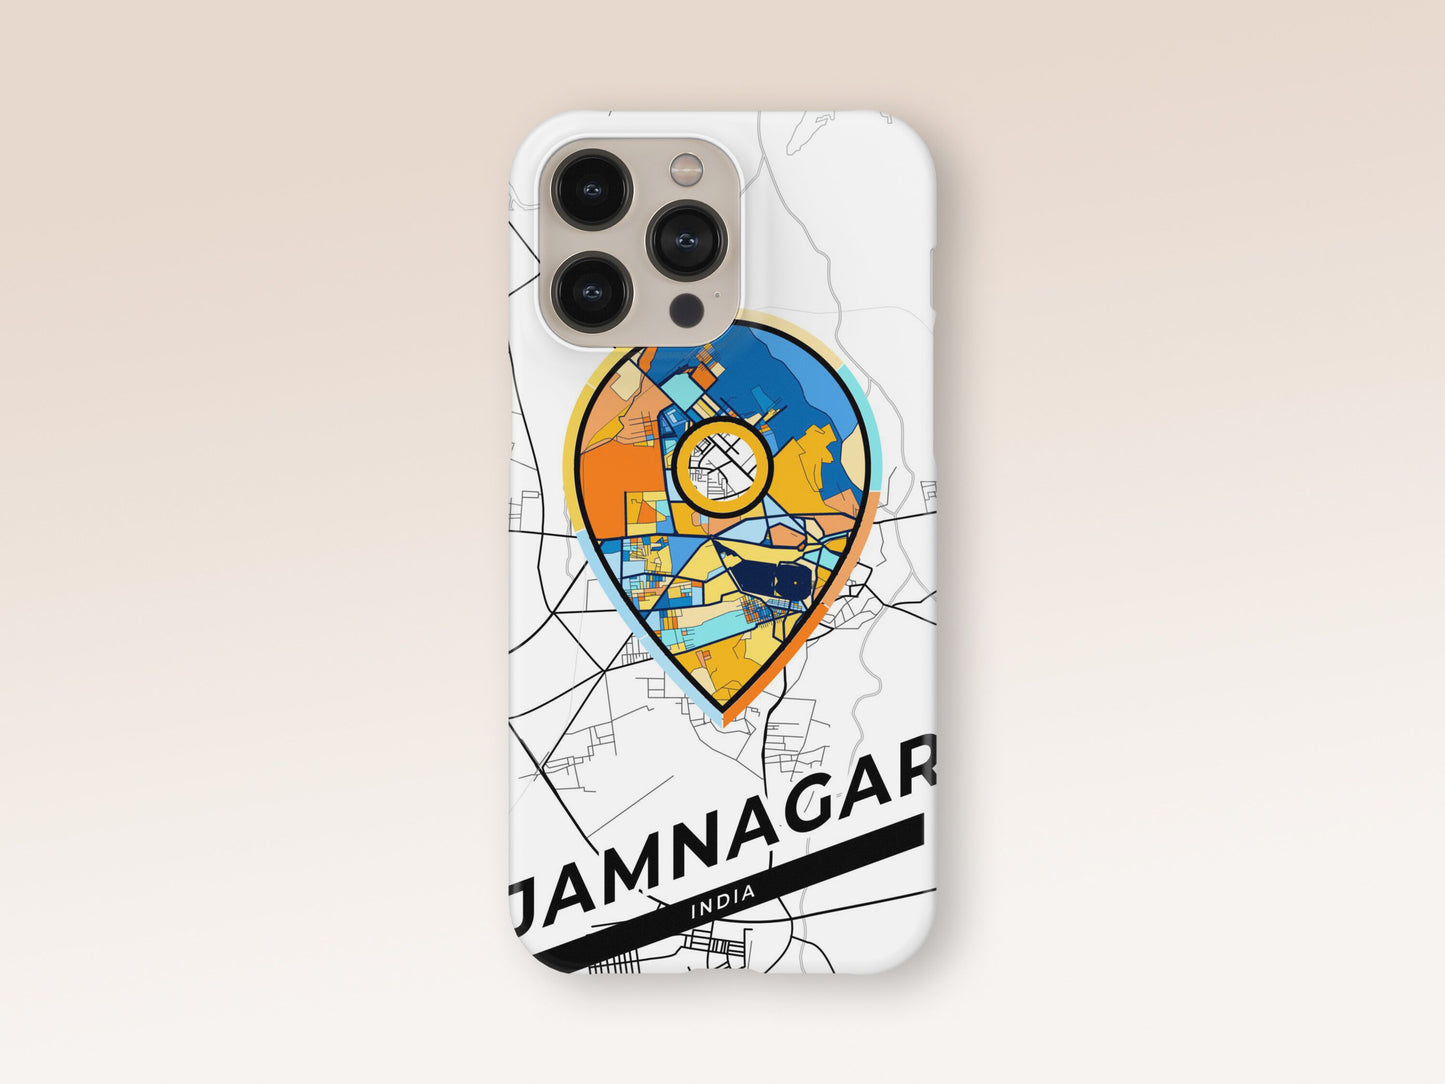 Jamnagar India slim phone case with colorful icon. Birthday, wedding or housewarming gift. Couple match cases. 1